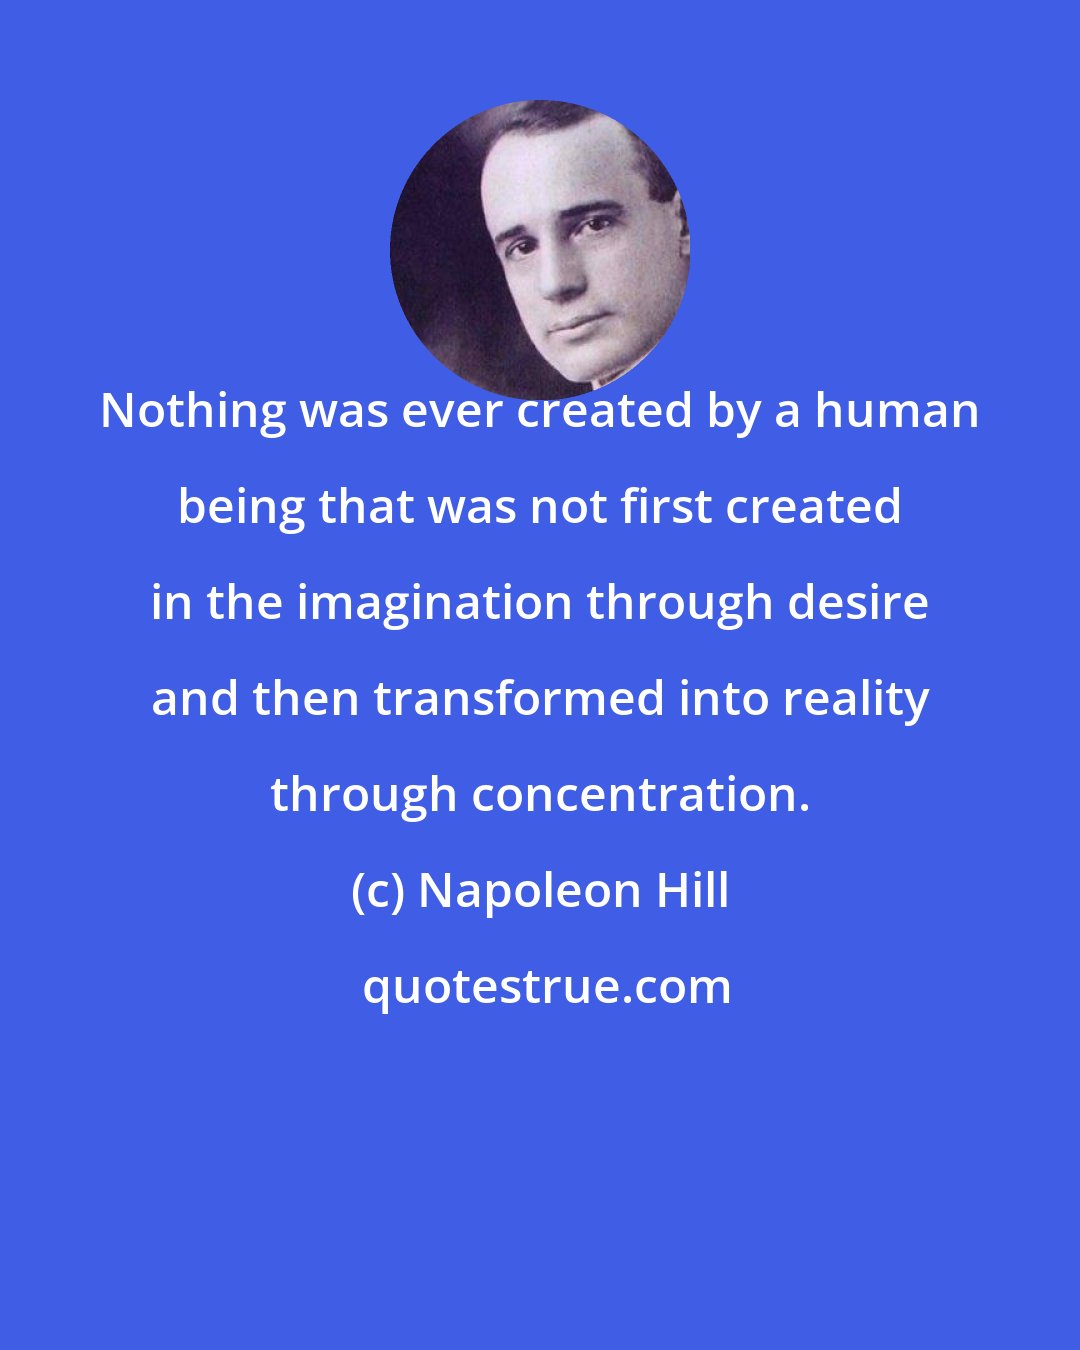 Napoleon Hill: Nothing was ever created by a human being that was not first created in the imagination through desire and then transformed into reality through concentration.